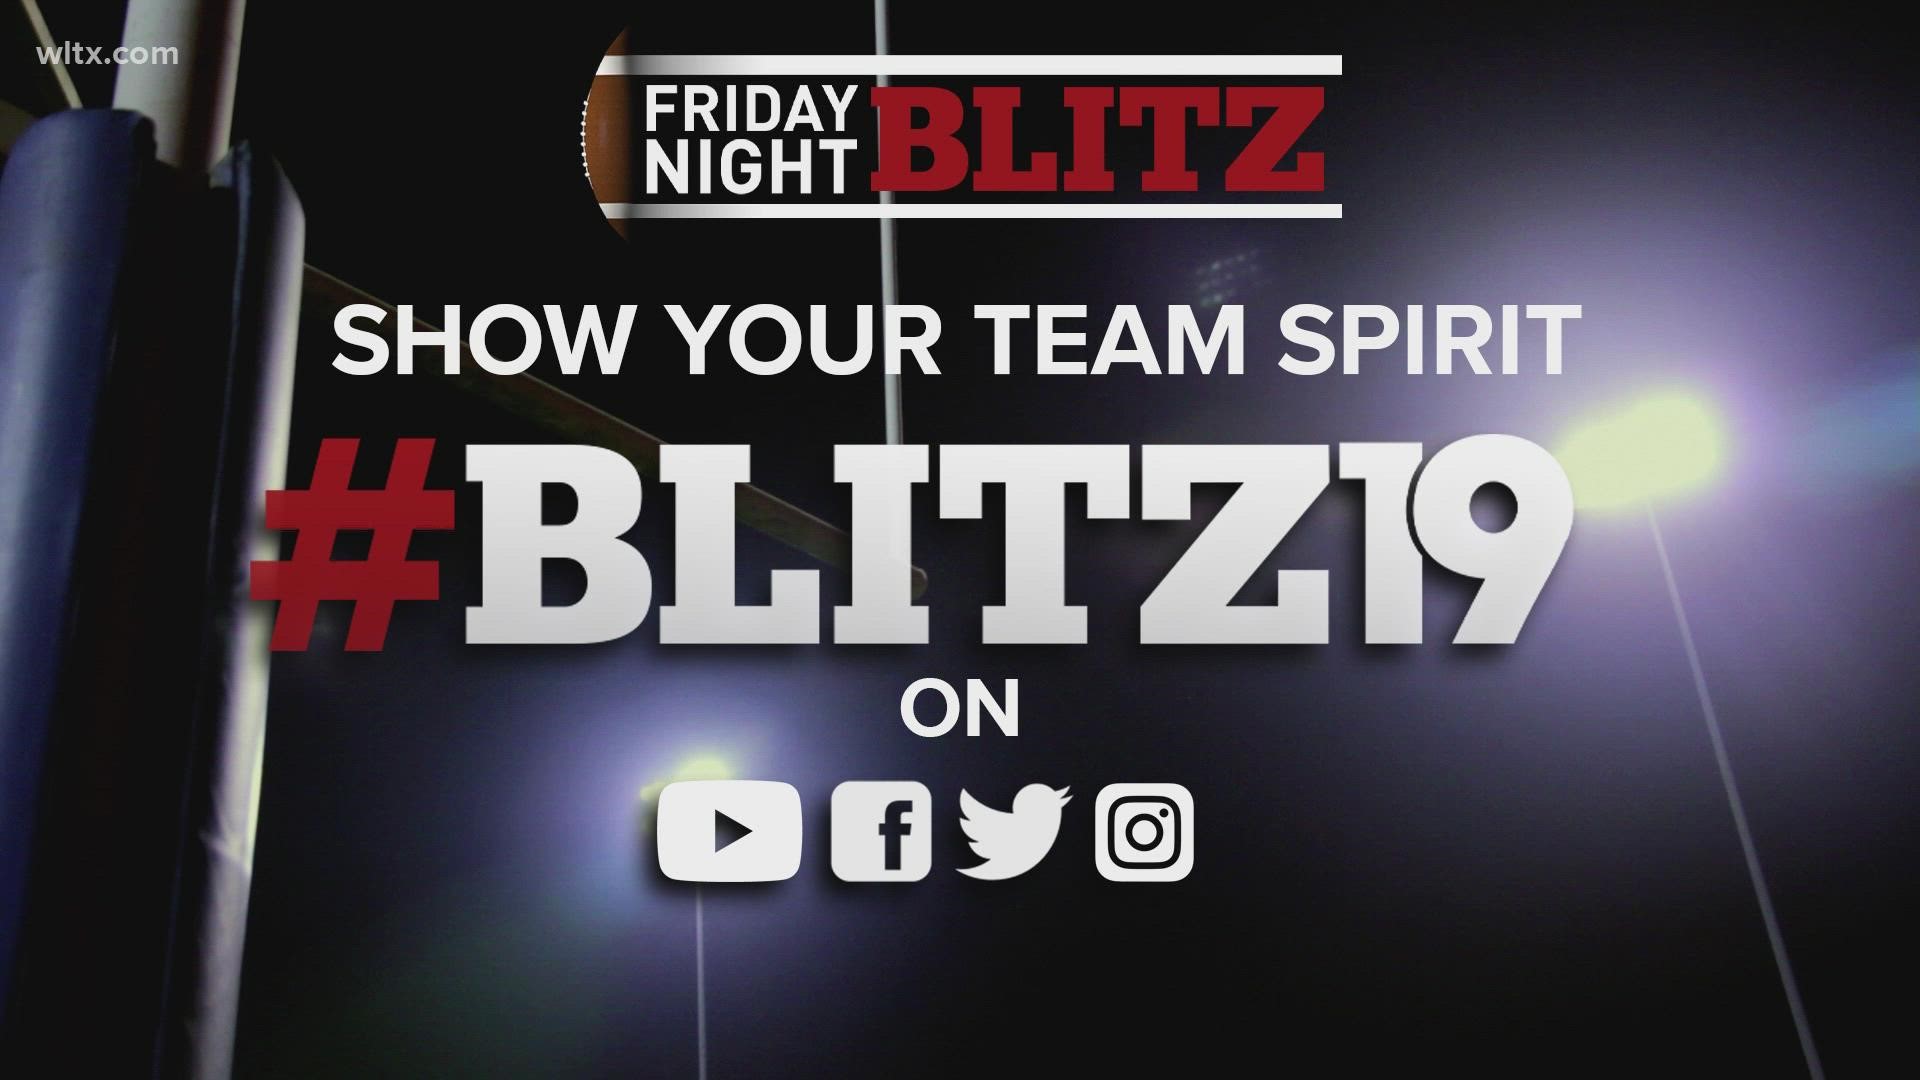 It is Week 5 of the Friday Night Blitz and tonight two top 25 teams in the country are squaring off in Irmo.